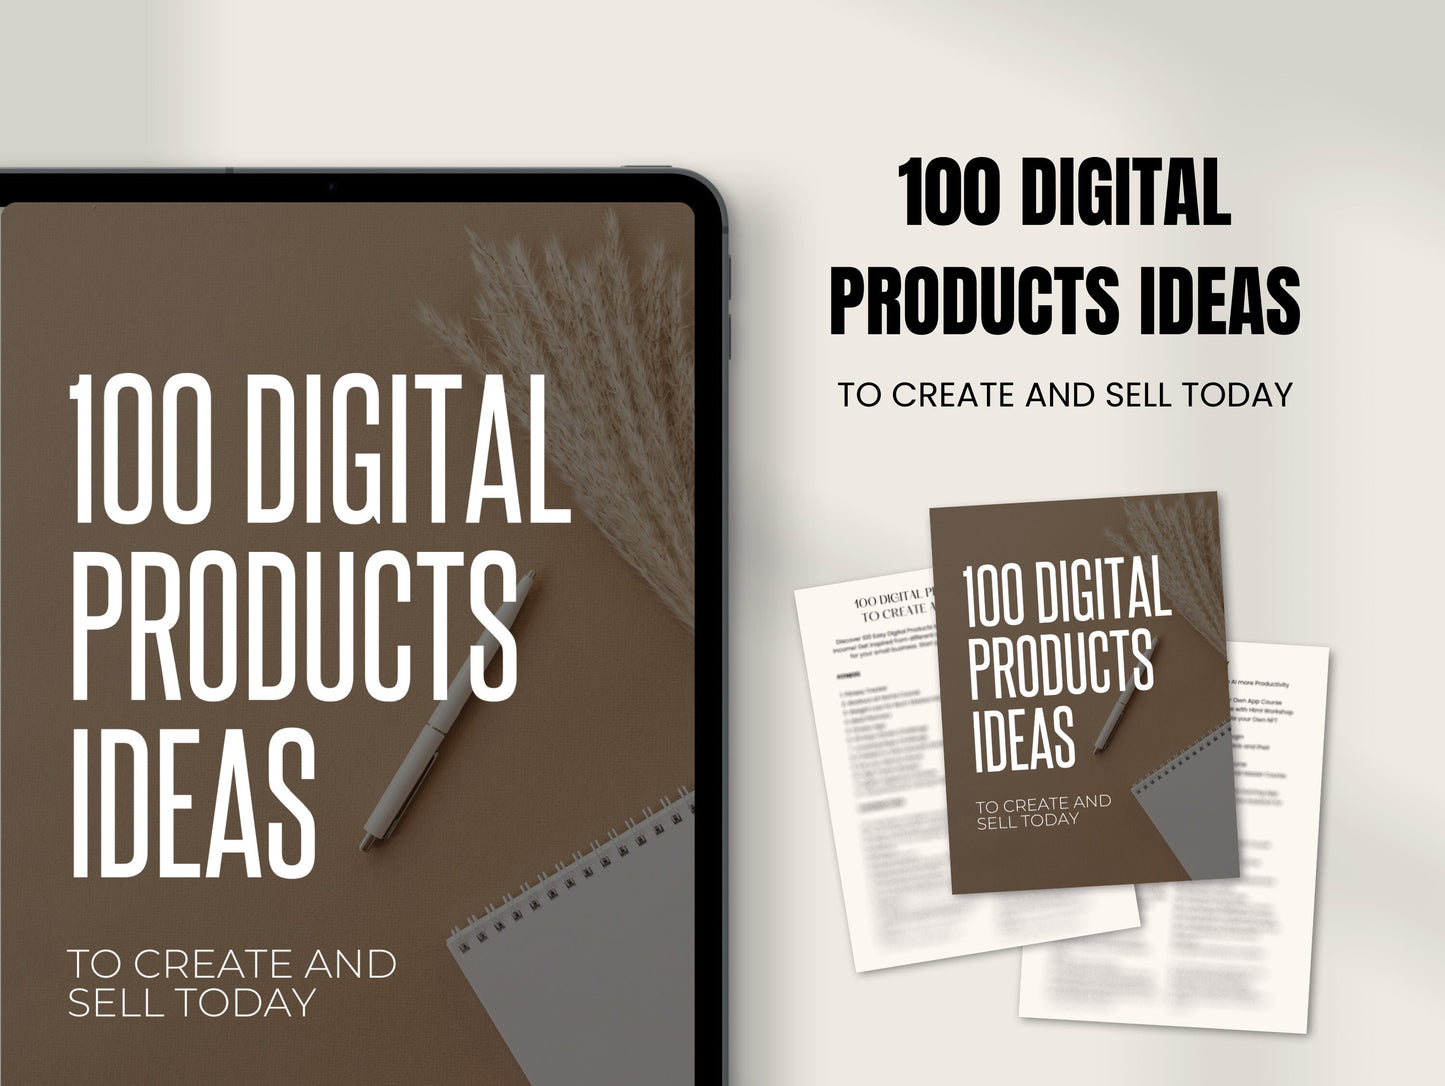 Master Resell Rights How to Sell Digital Products as A beginner Ebook